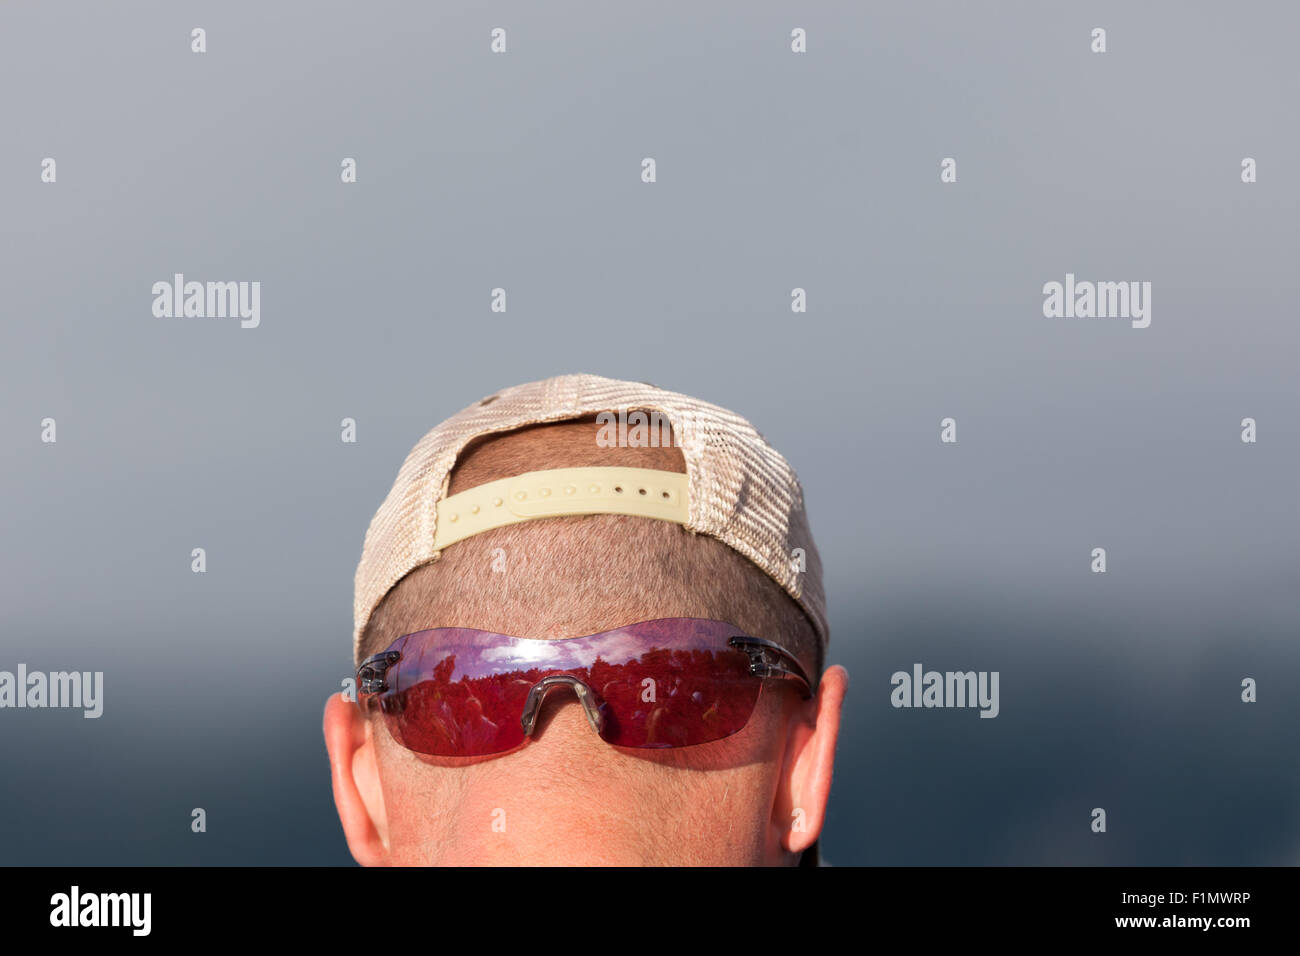 A man wears his sunglasses on the back of his shaved head with a hat that gives the illusion of a face. Stock Photo